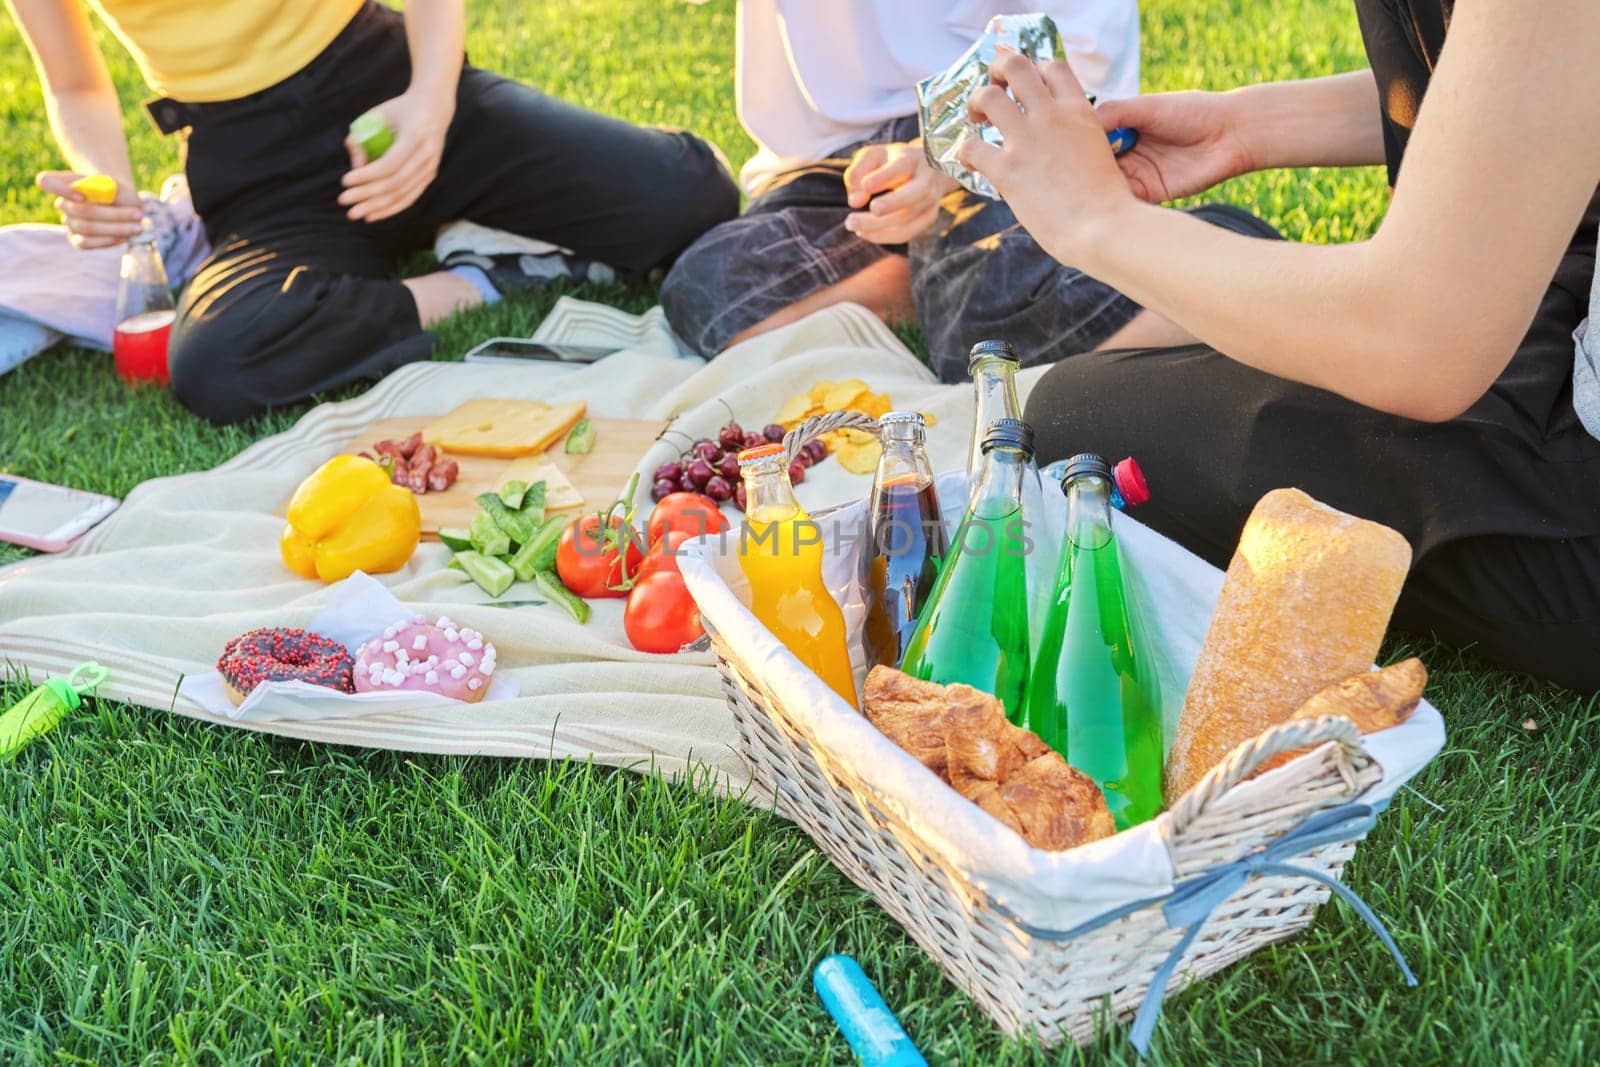 Close-up food and drink for picnic on green grass. Group of young people resting in nature, basket with bread, cheese fruits vegetables snacks juices on tablecloth. Youth, leisure, lifestyle, fun,